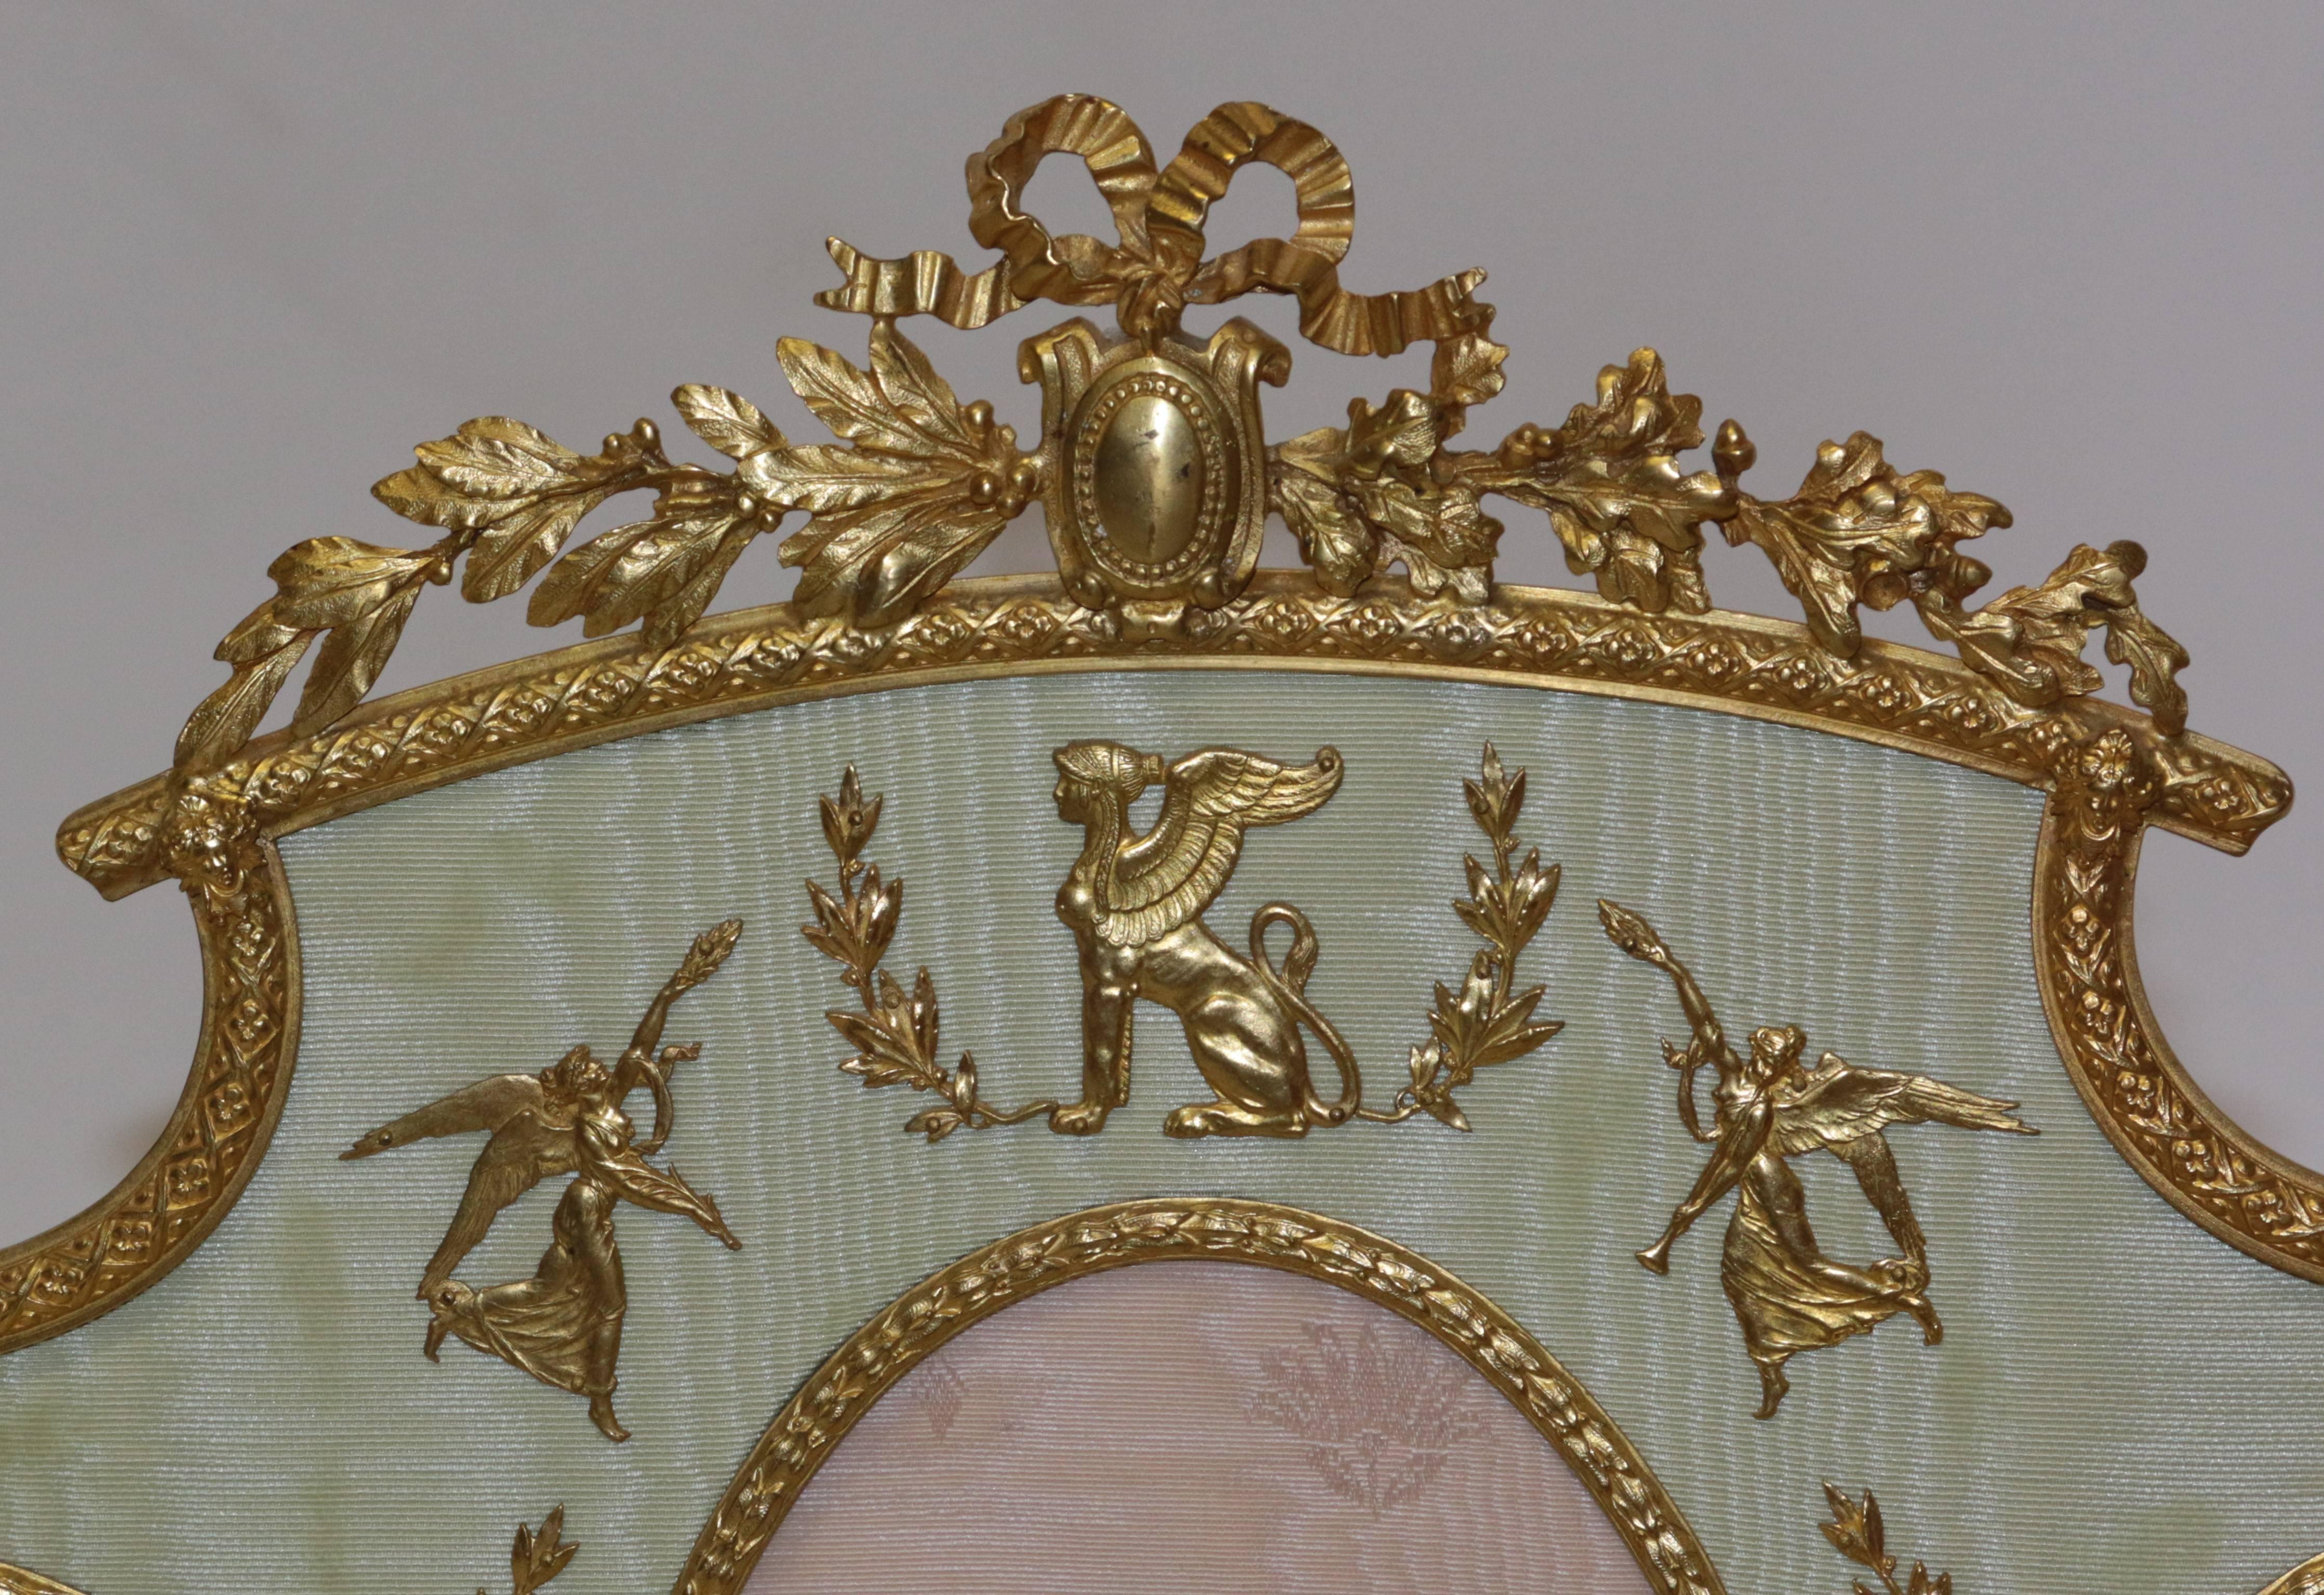 French multi picture ormolu frame. The figurines inside of the frame are made of bronze ormolu with great attention given to detail. The stand is made of bronze ormolu as well. This elegant item holds seven picture within the ormolu etched frames.